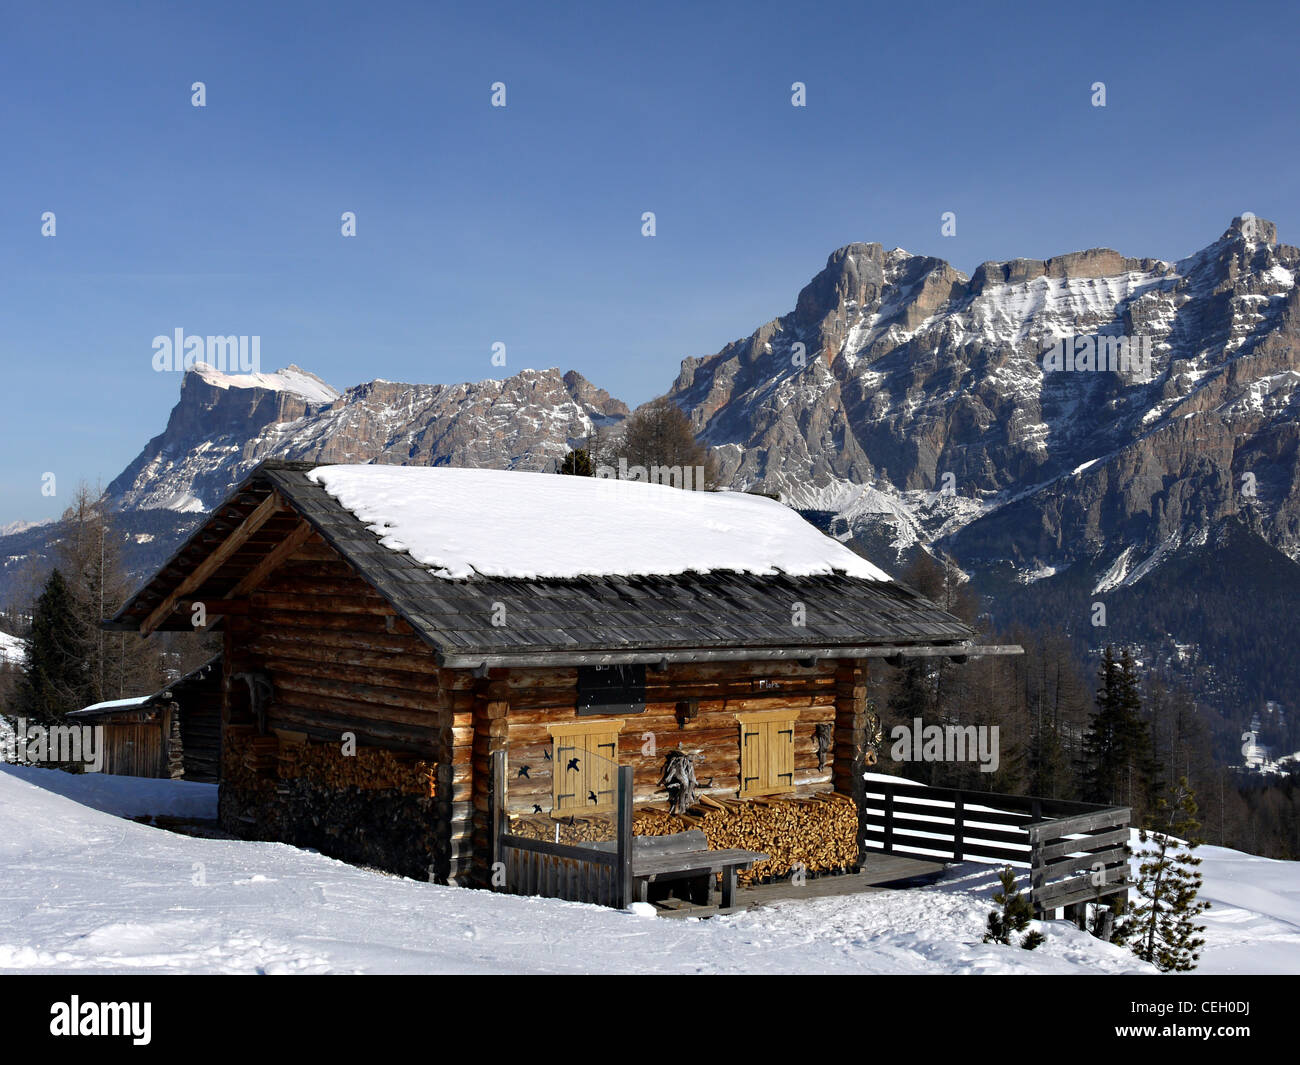 Wooden chalet in the snow near San Cassiano in the Dolomites in Italy. Mountains behind typical of area, called the Contarines. Stock Photo